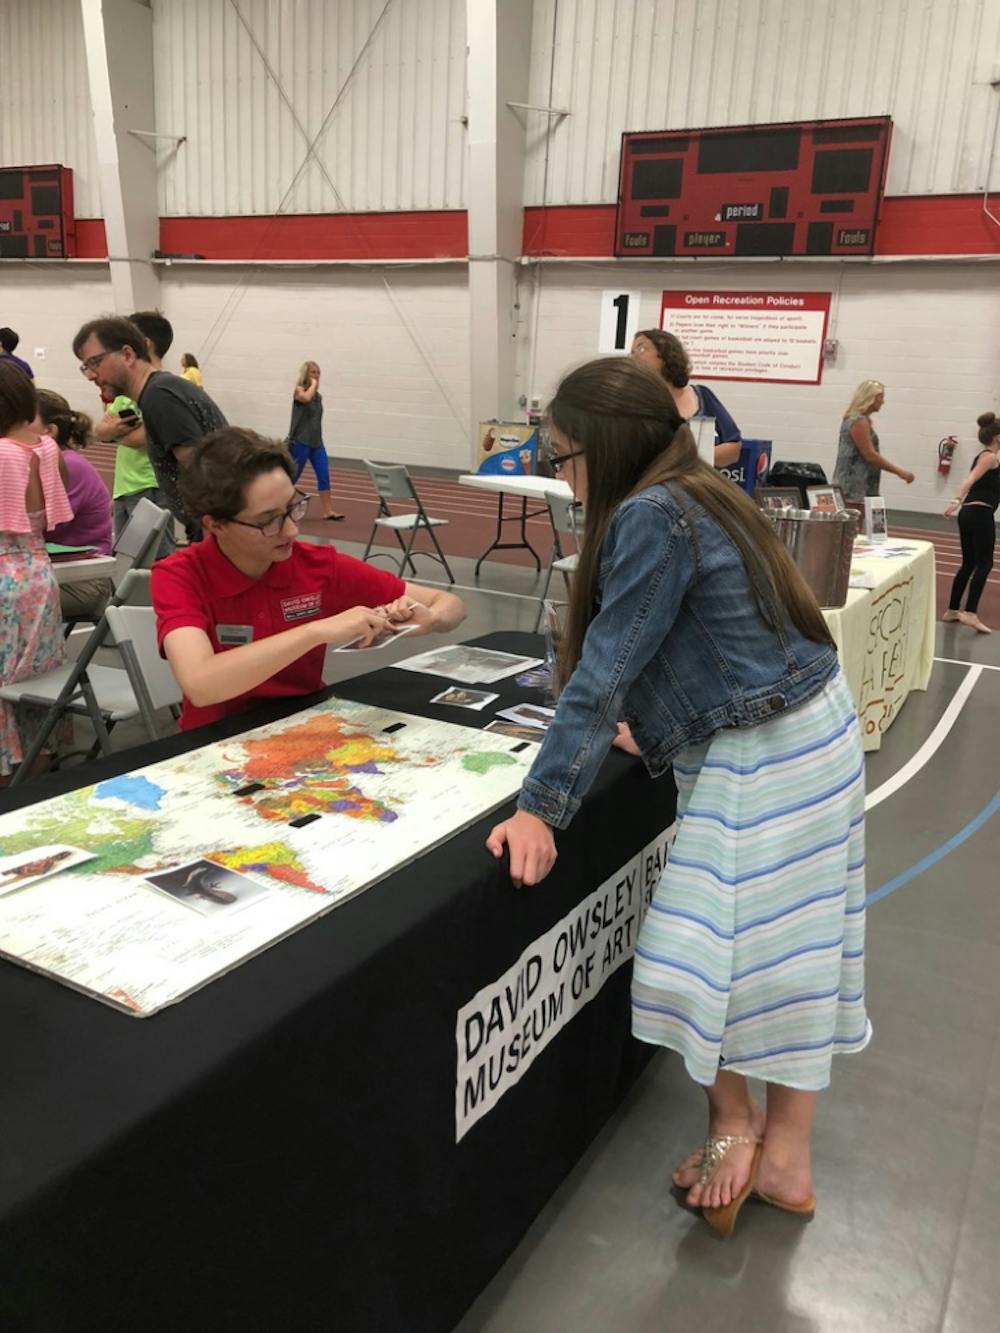 Senior Joan Seig explains the location and culture of a piece of art on Saturday, June 9, 2018 at Festival on the Green in Muncie, IN. Seig helped organized public outreach events throughout the summer as a program intern at the David Owsley Museum of Art. Photo provided. 